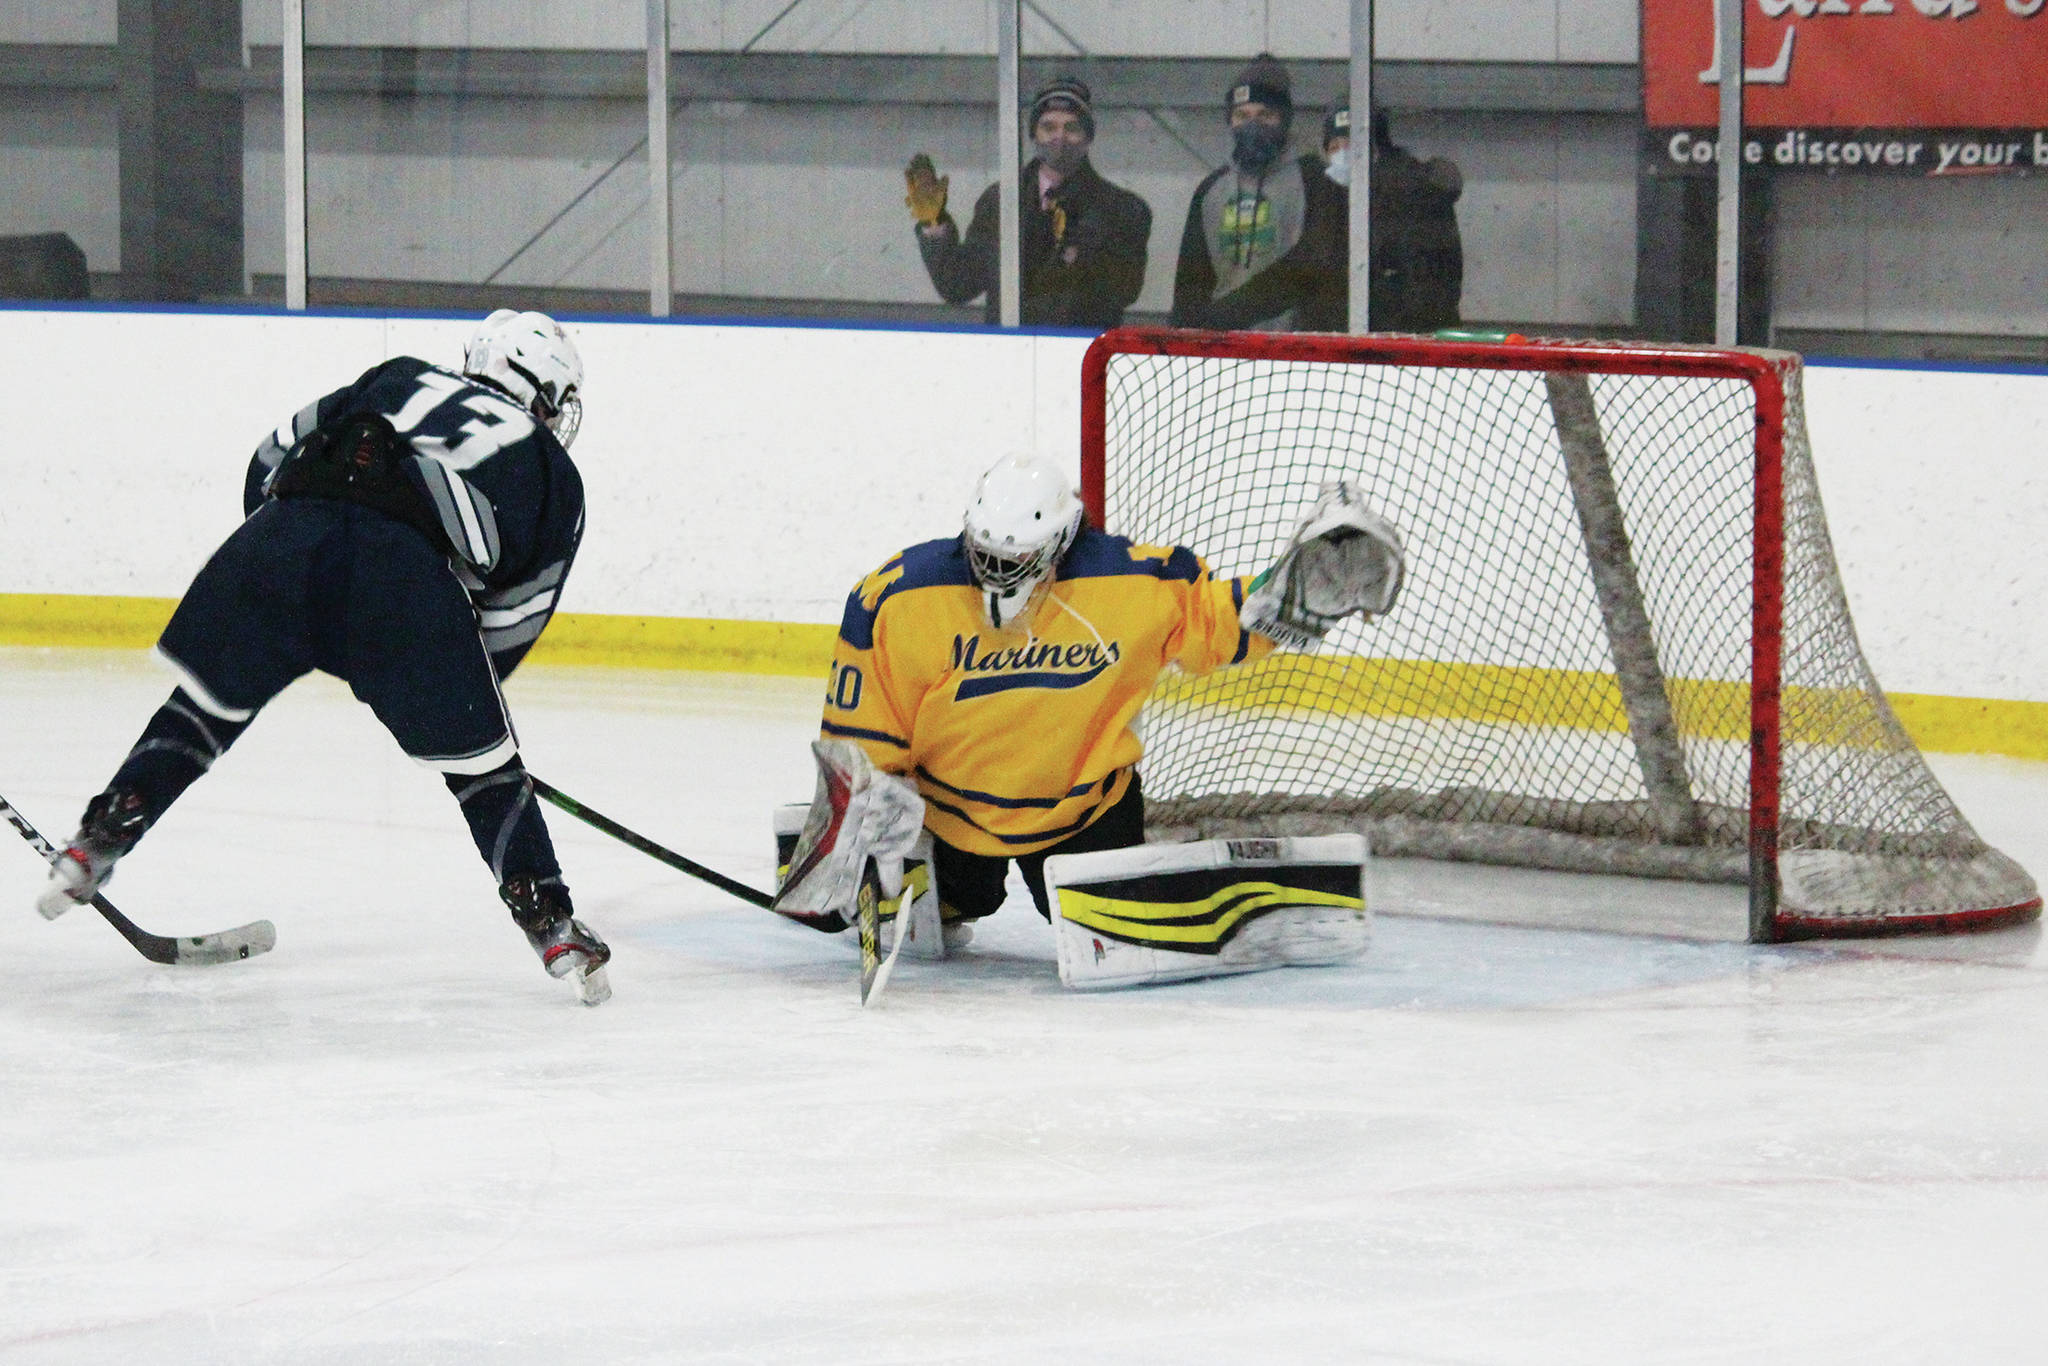 Freshman goaltender Blaise Banks stops a shot from Soldotna’s Silas Larsen during a Saturday, Feb. 6, 2021 hockey game at the Kevin Bell Arena in Homer, Alaska. (Photo by Megan Pacer/Homer News)